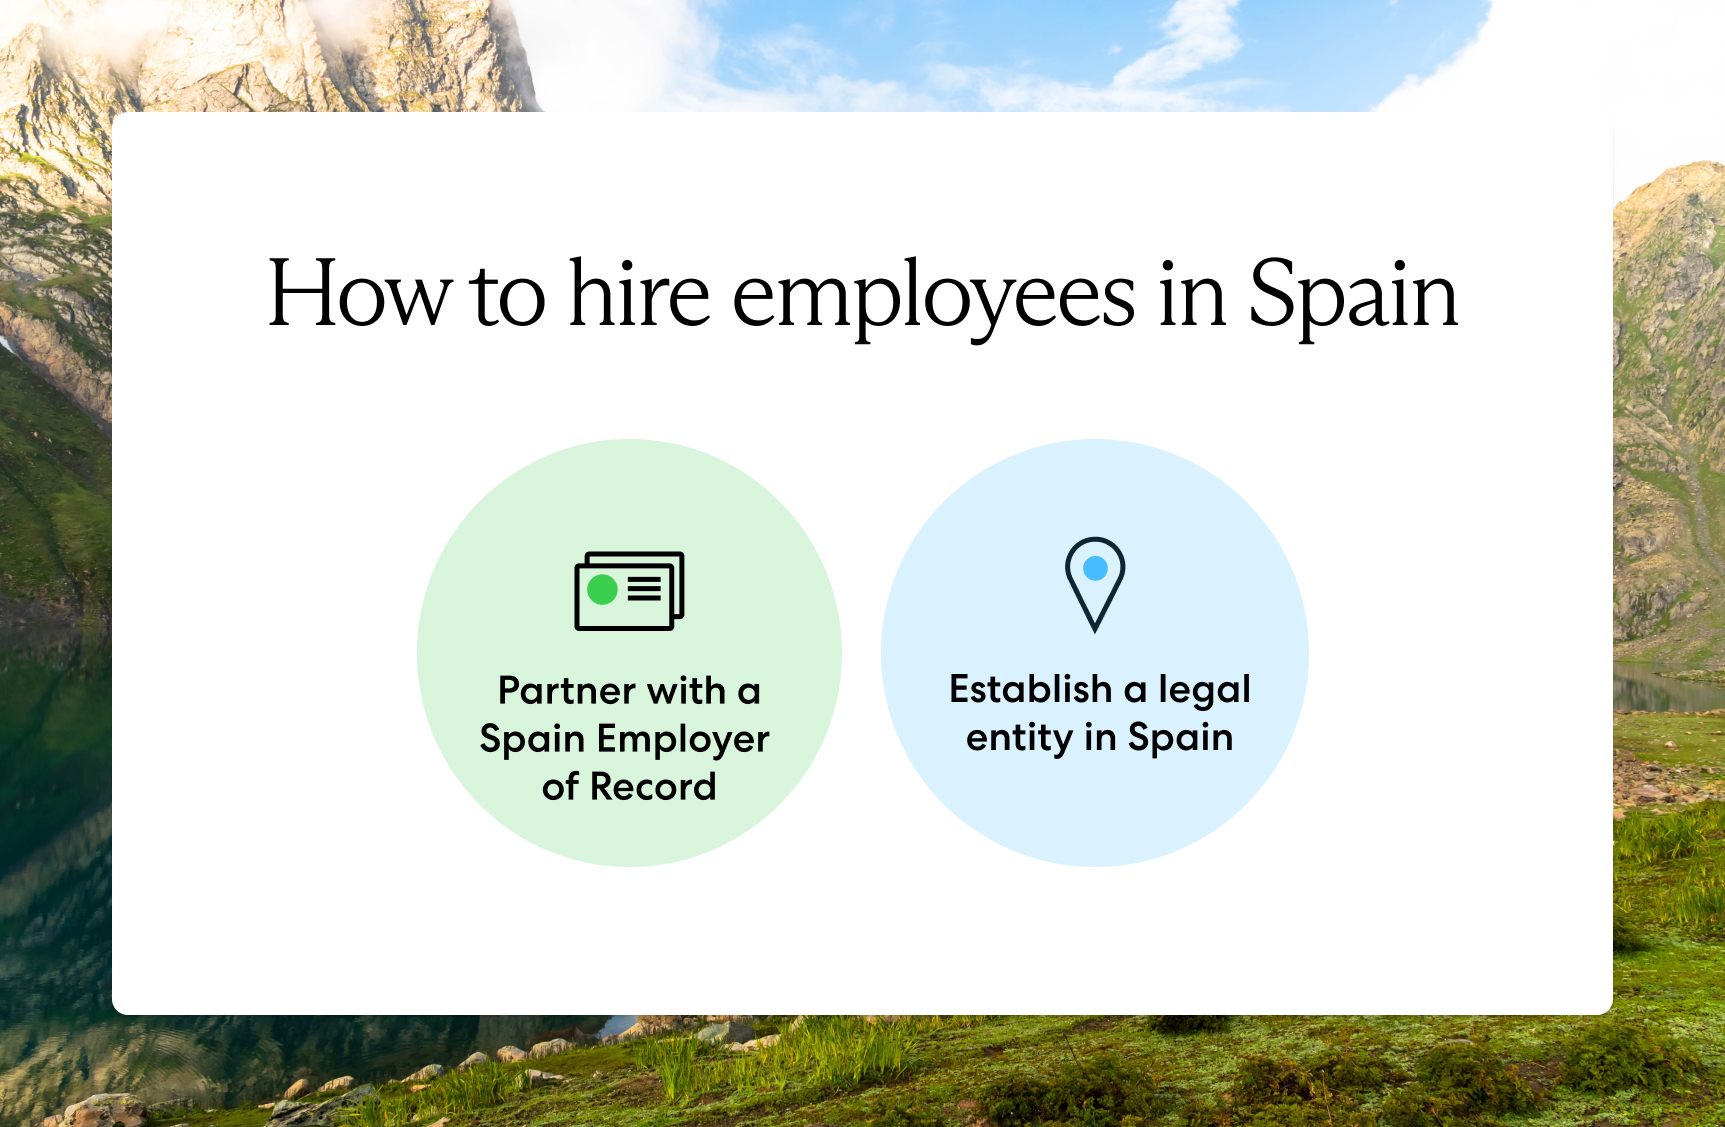 2 ways to hire employees in Spain: Partner with an employer of record and establish a legal entity